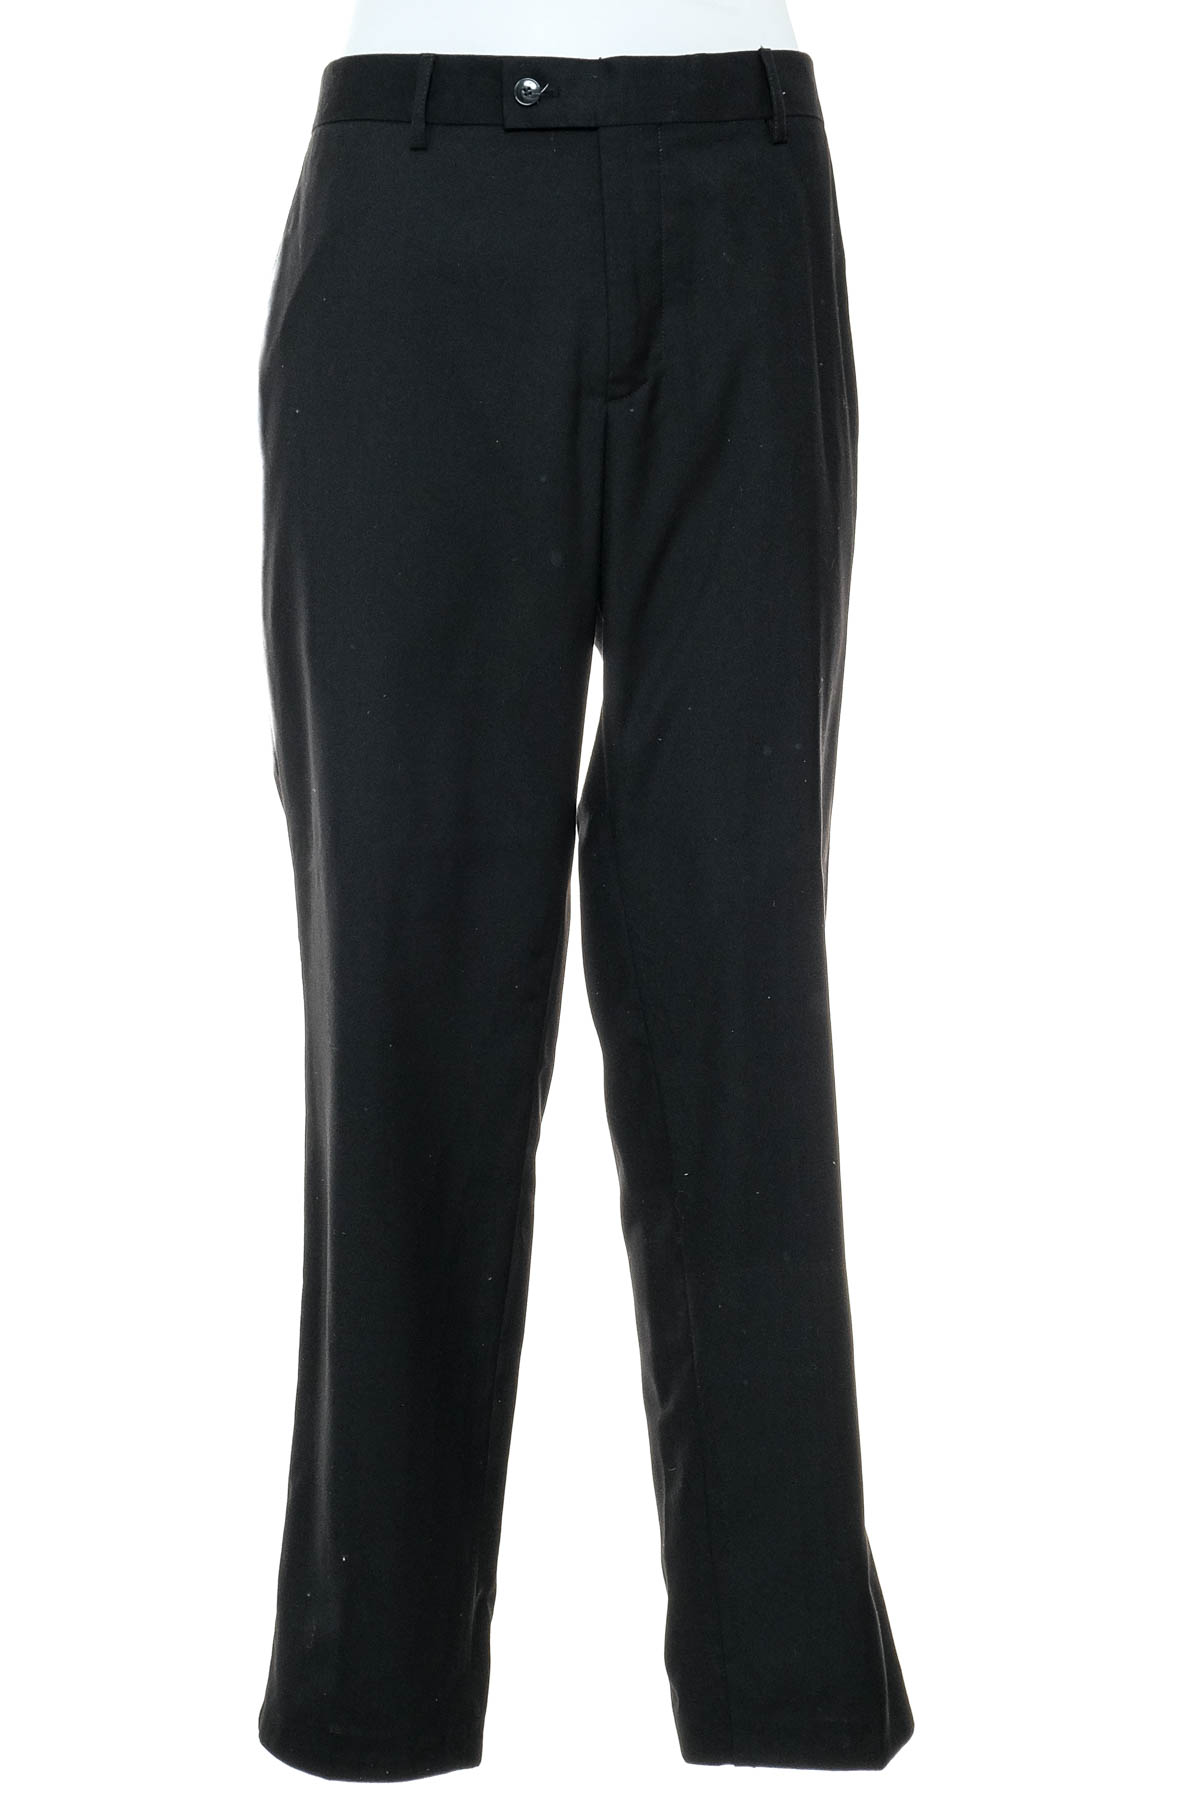 Men's trousers - Angelo Litrico x C&A - 0